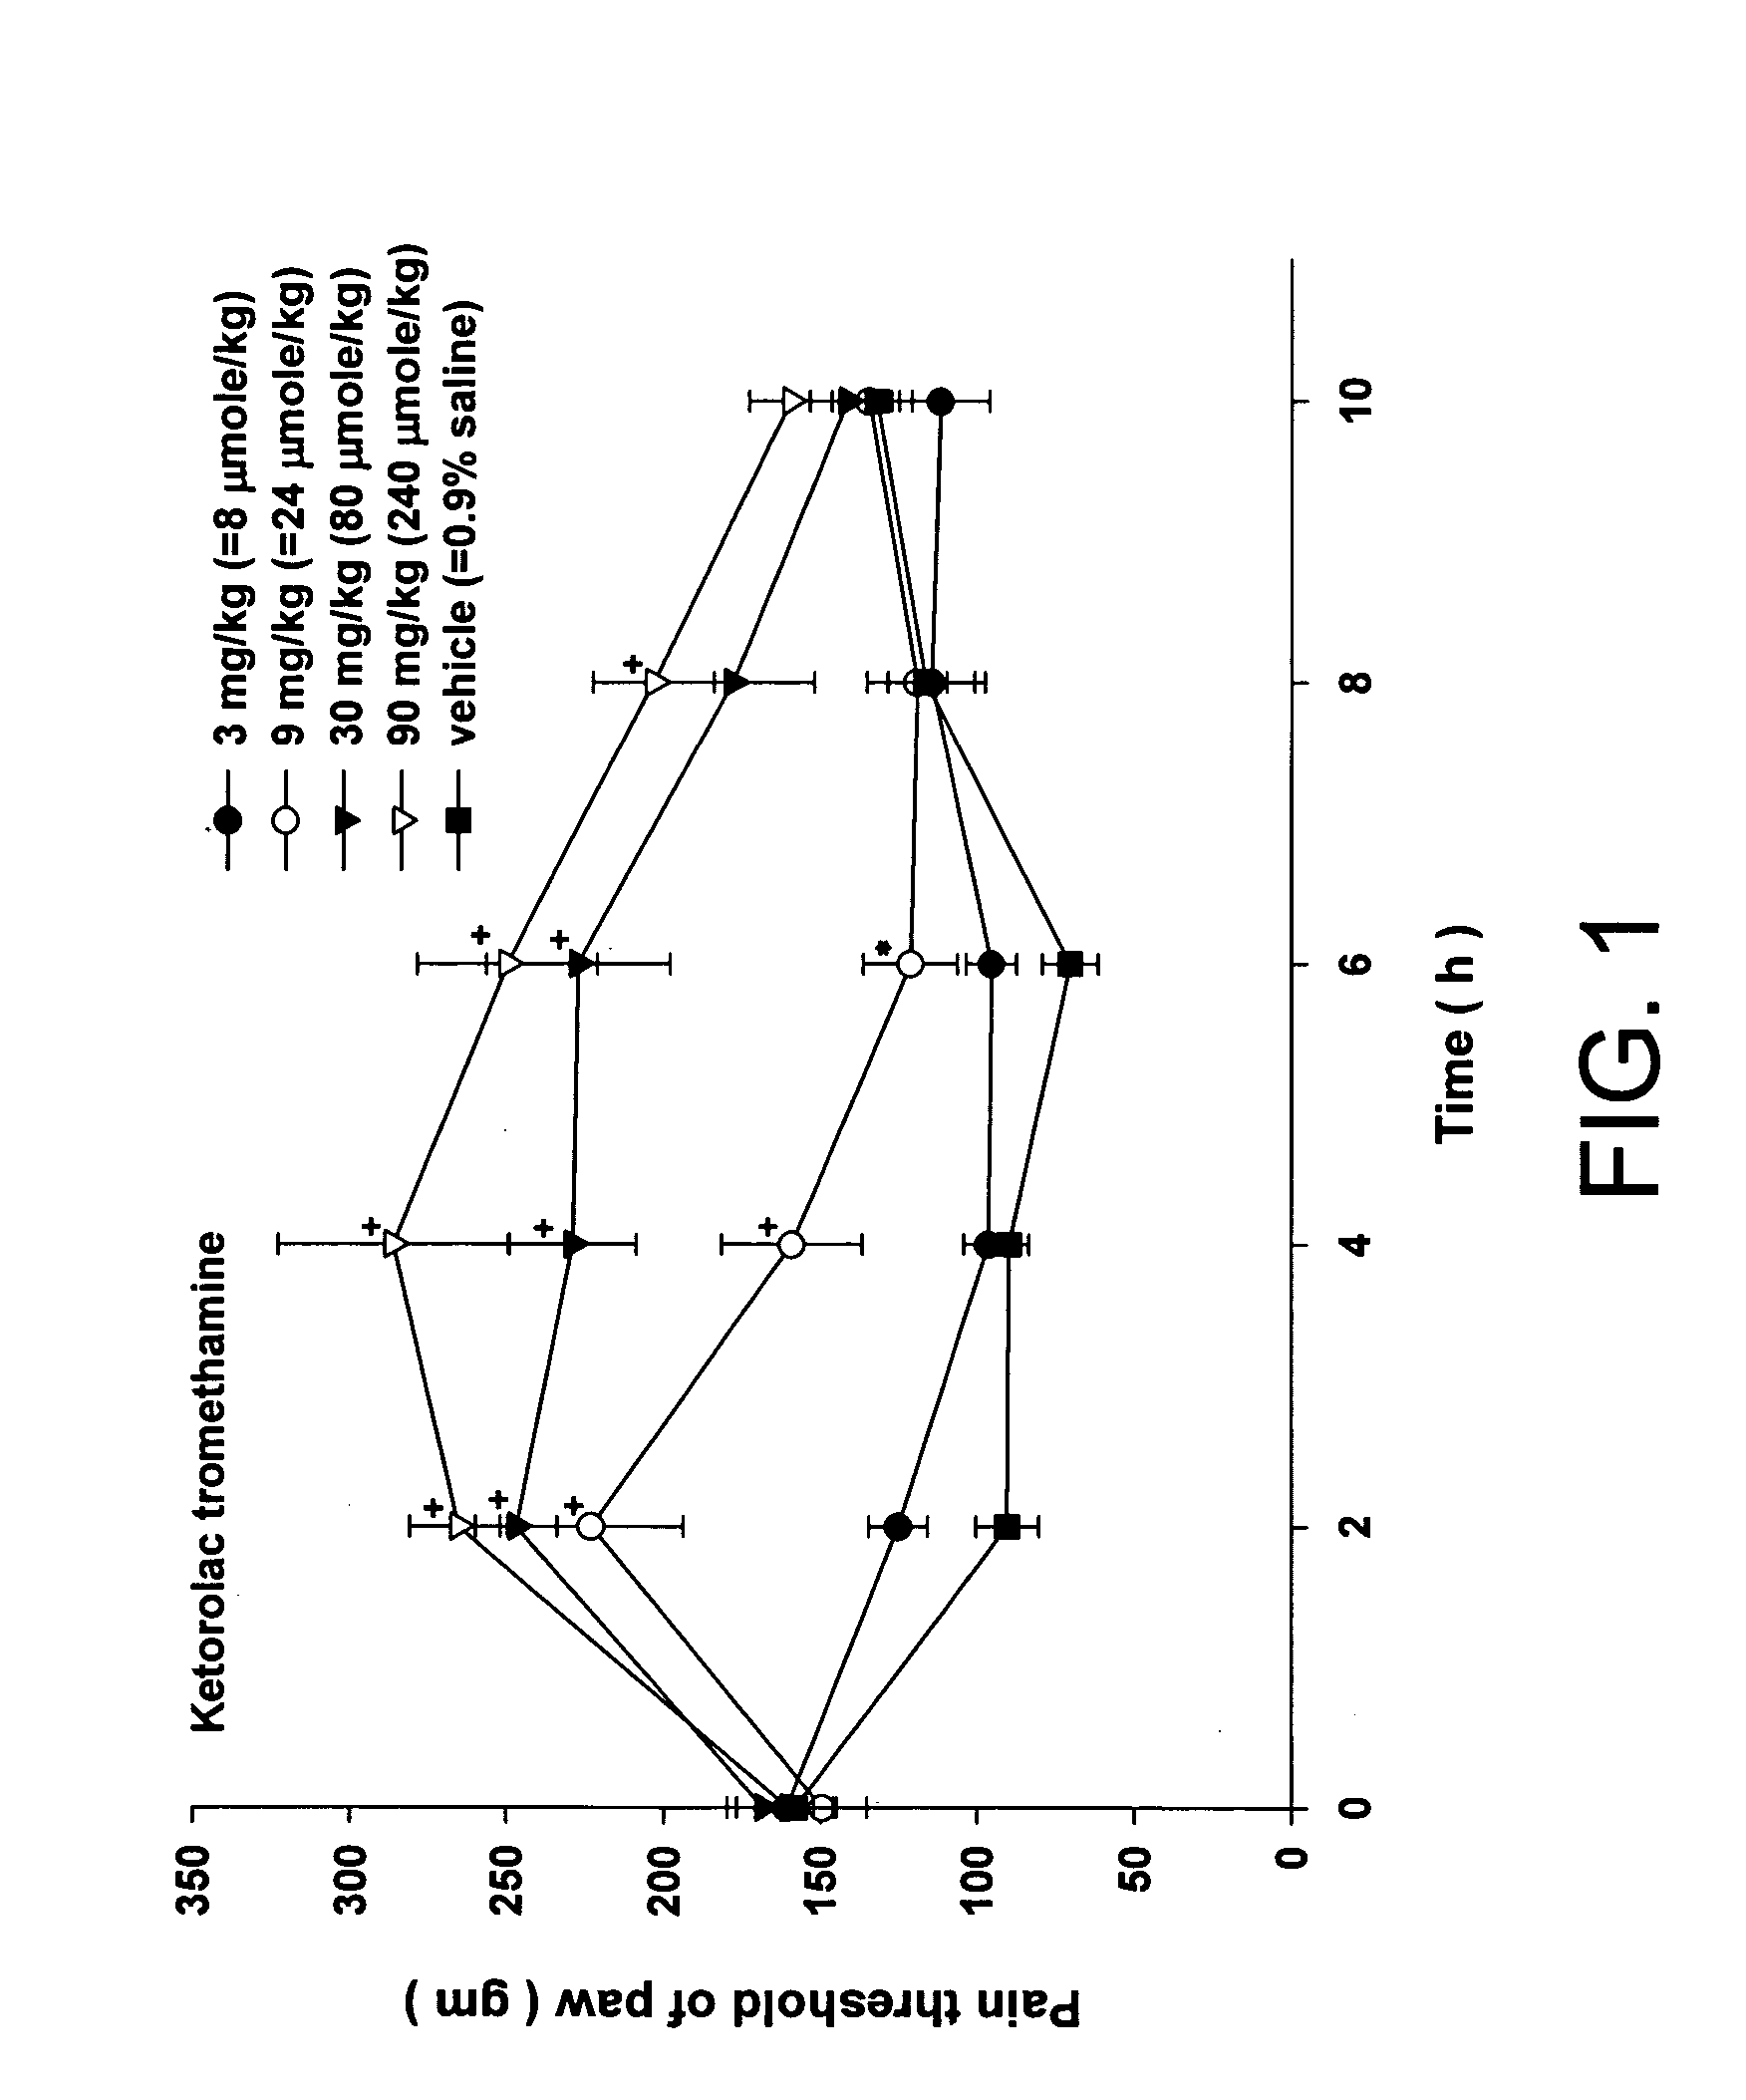 Injectable long-acting analgesic composition comprising an ester derivative of ketorolac